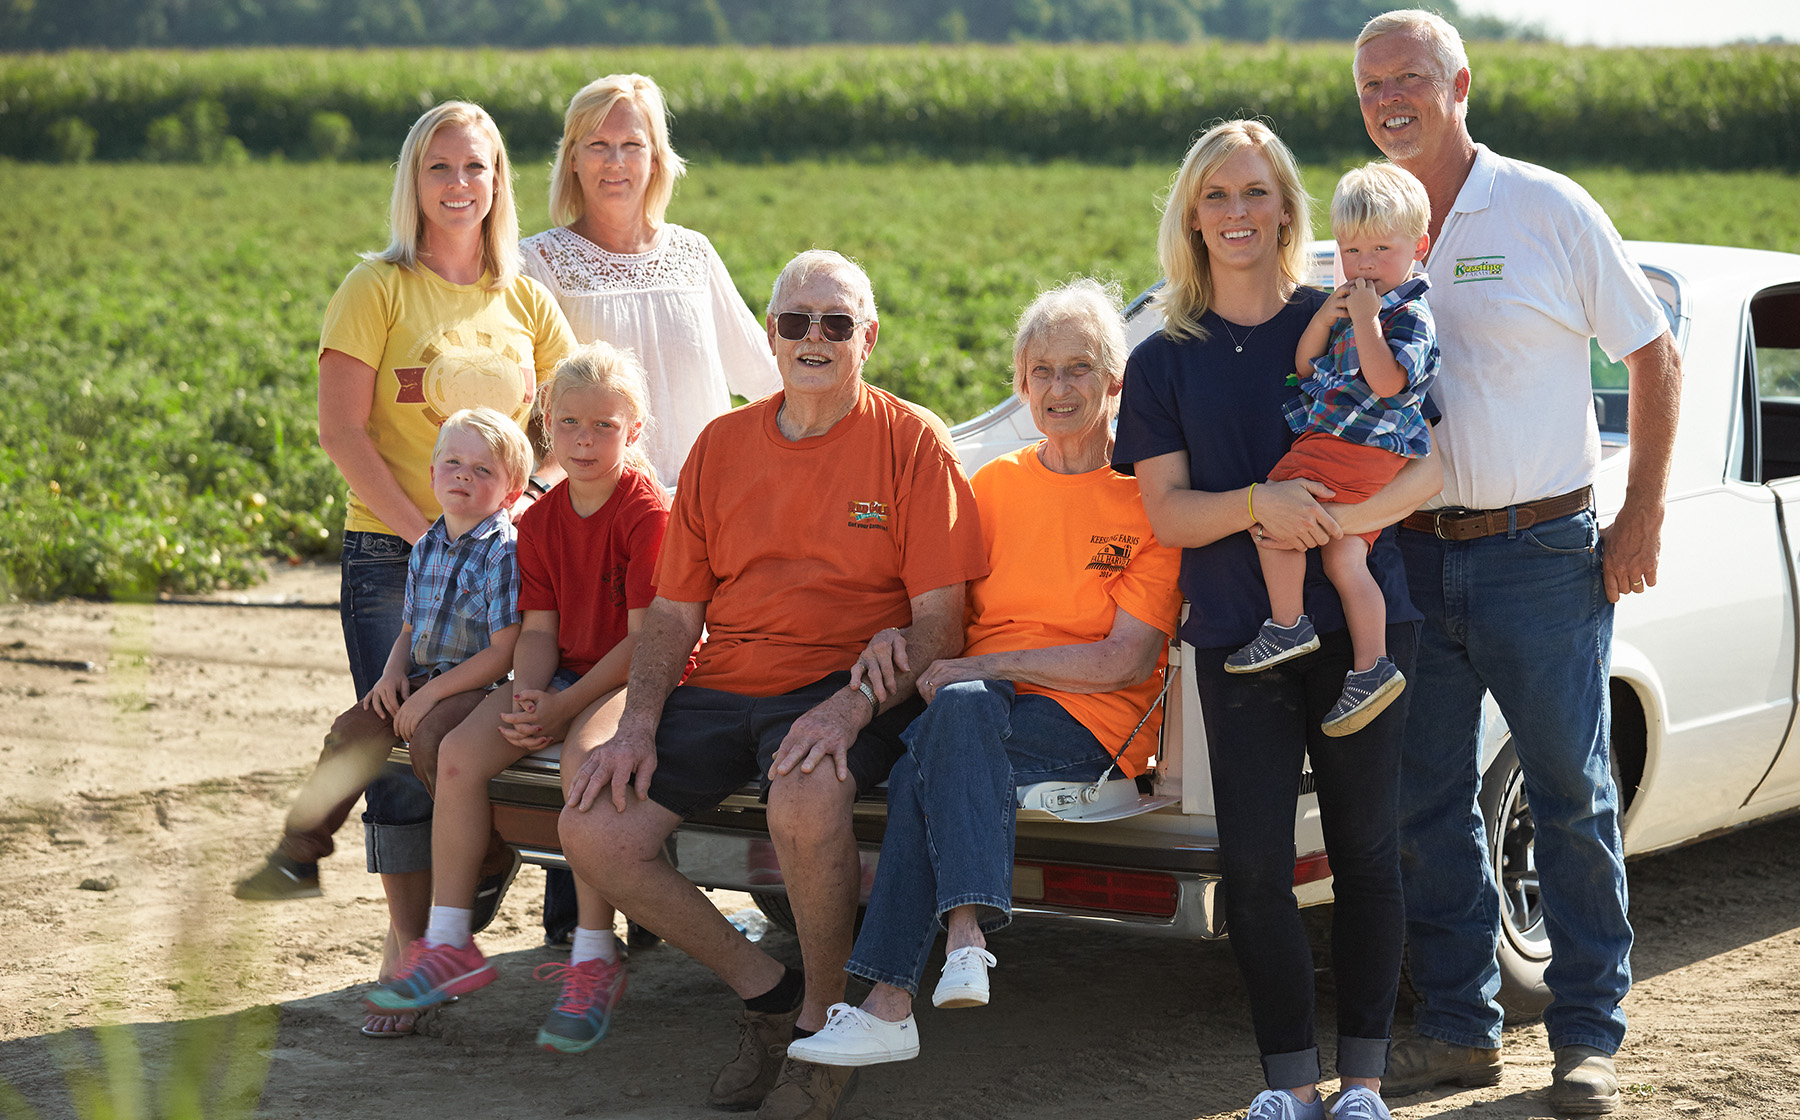 Image of Keesling Farms Growers for Red Gold Tomatoes Keesling family sitting on tailgate of El Camino